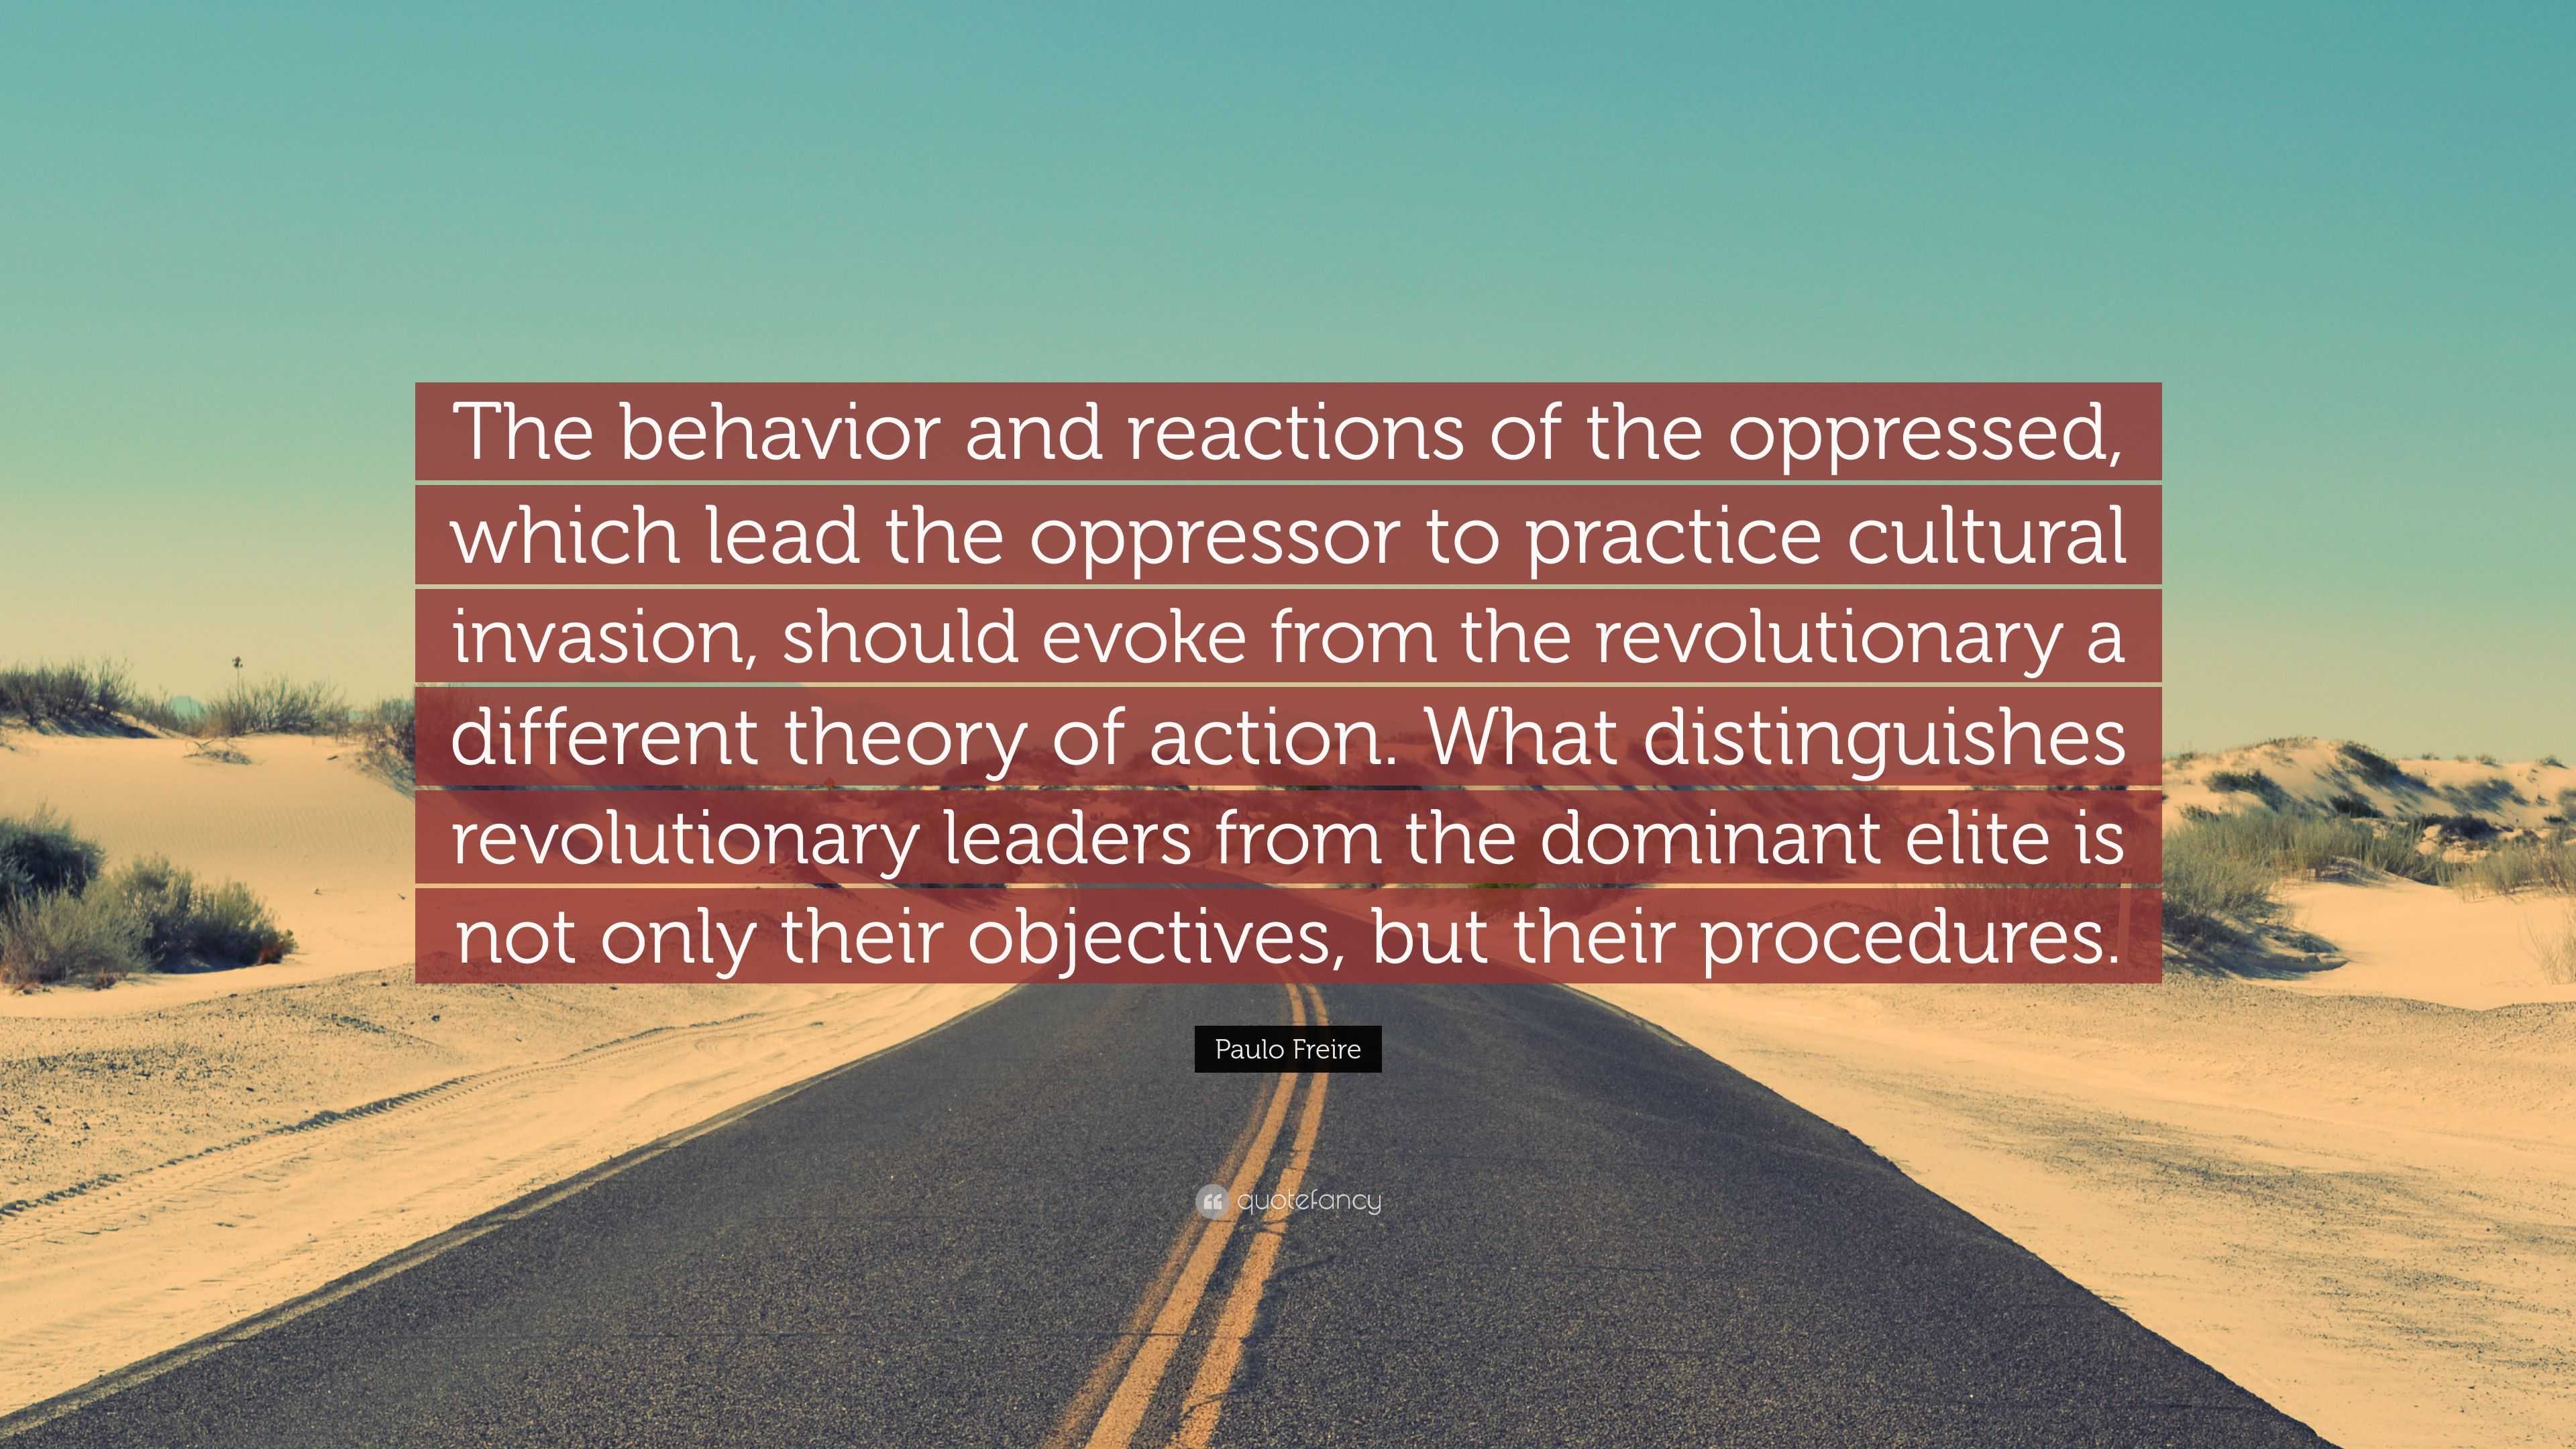 Paulo Freire Quote: “The behavior and reactions of the oppressed, which